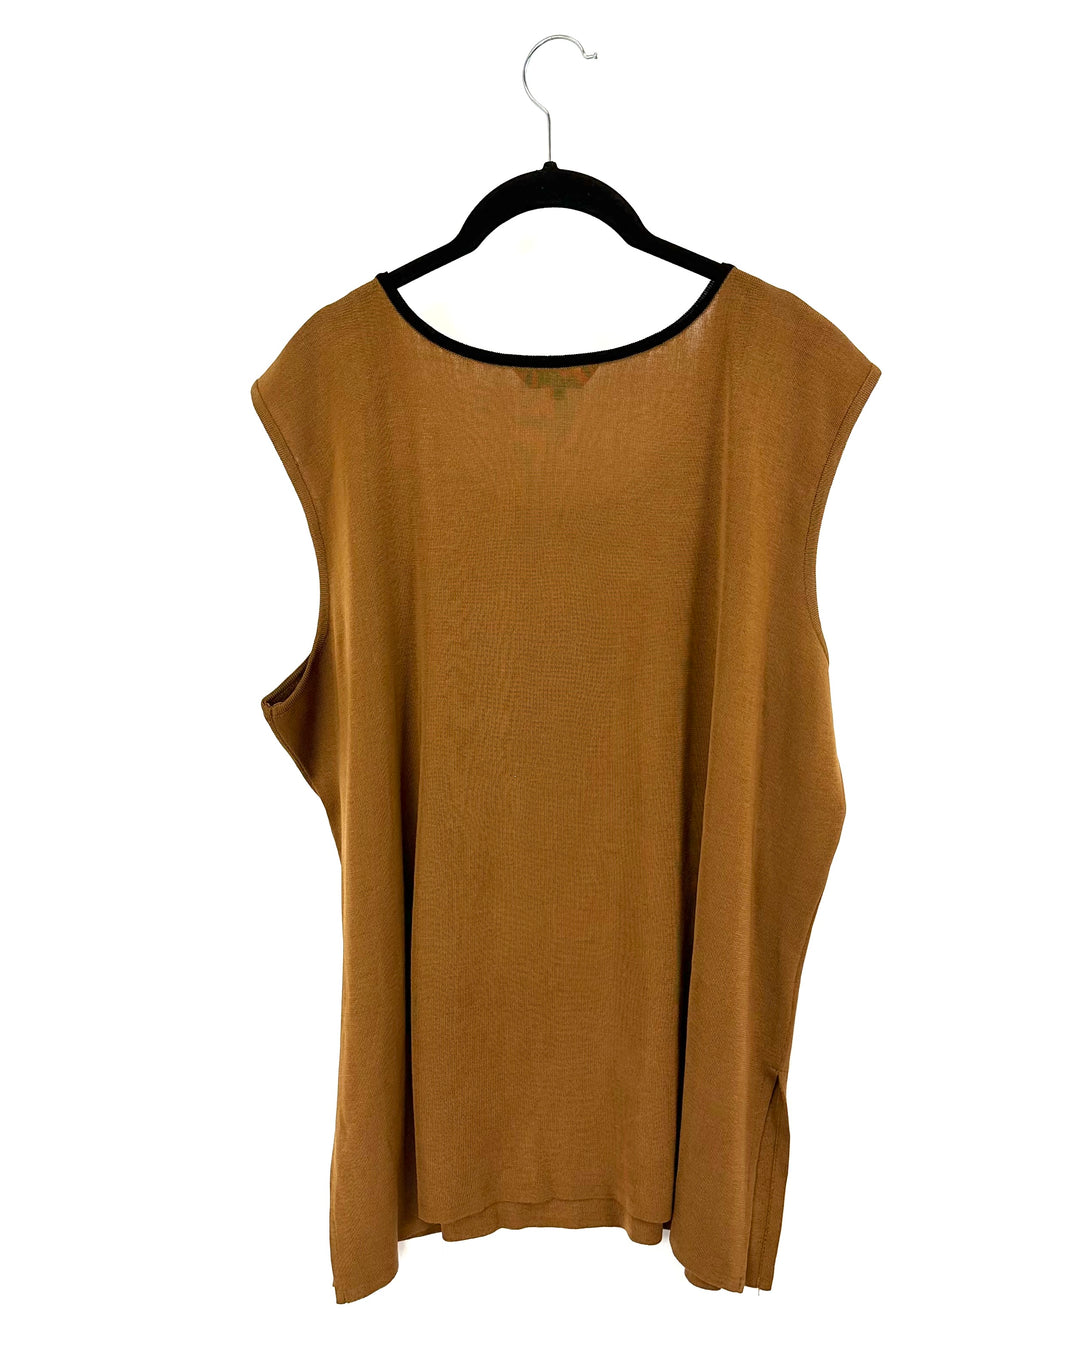 Brown And Black Knit Tank Top - 24W-26W